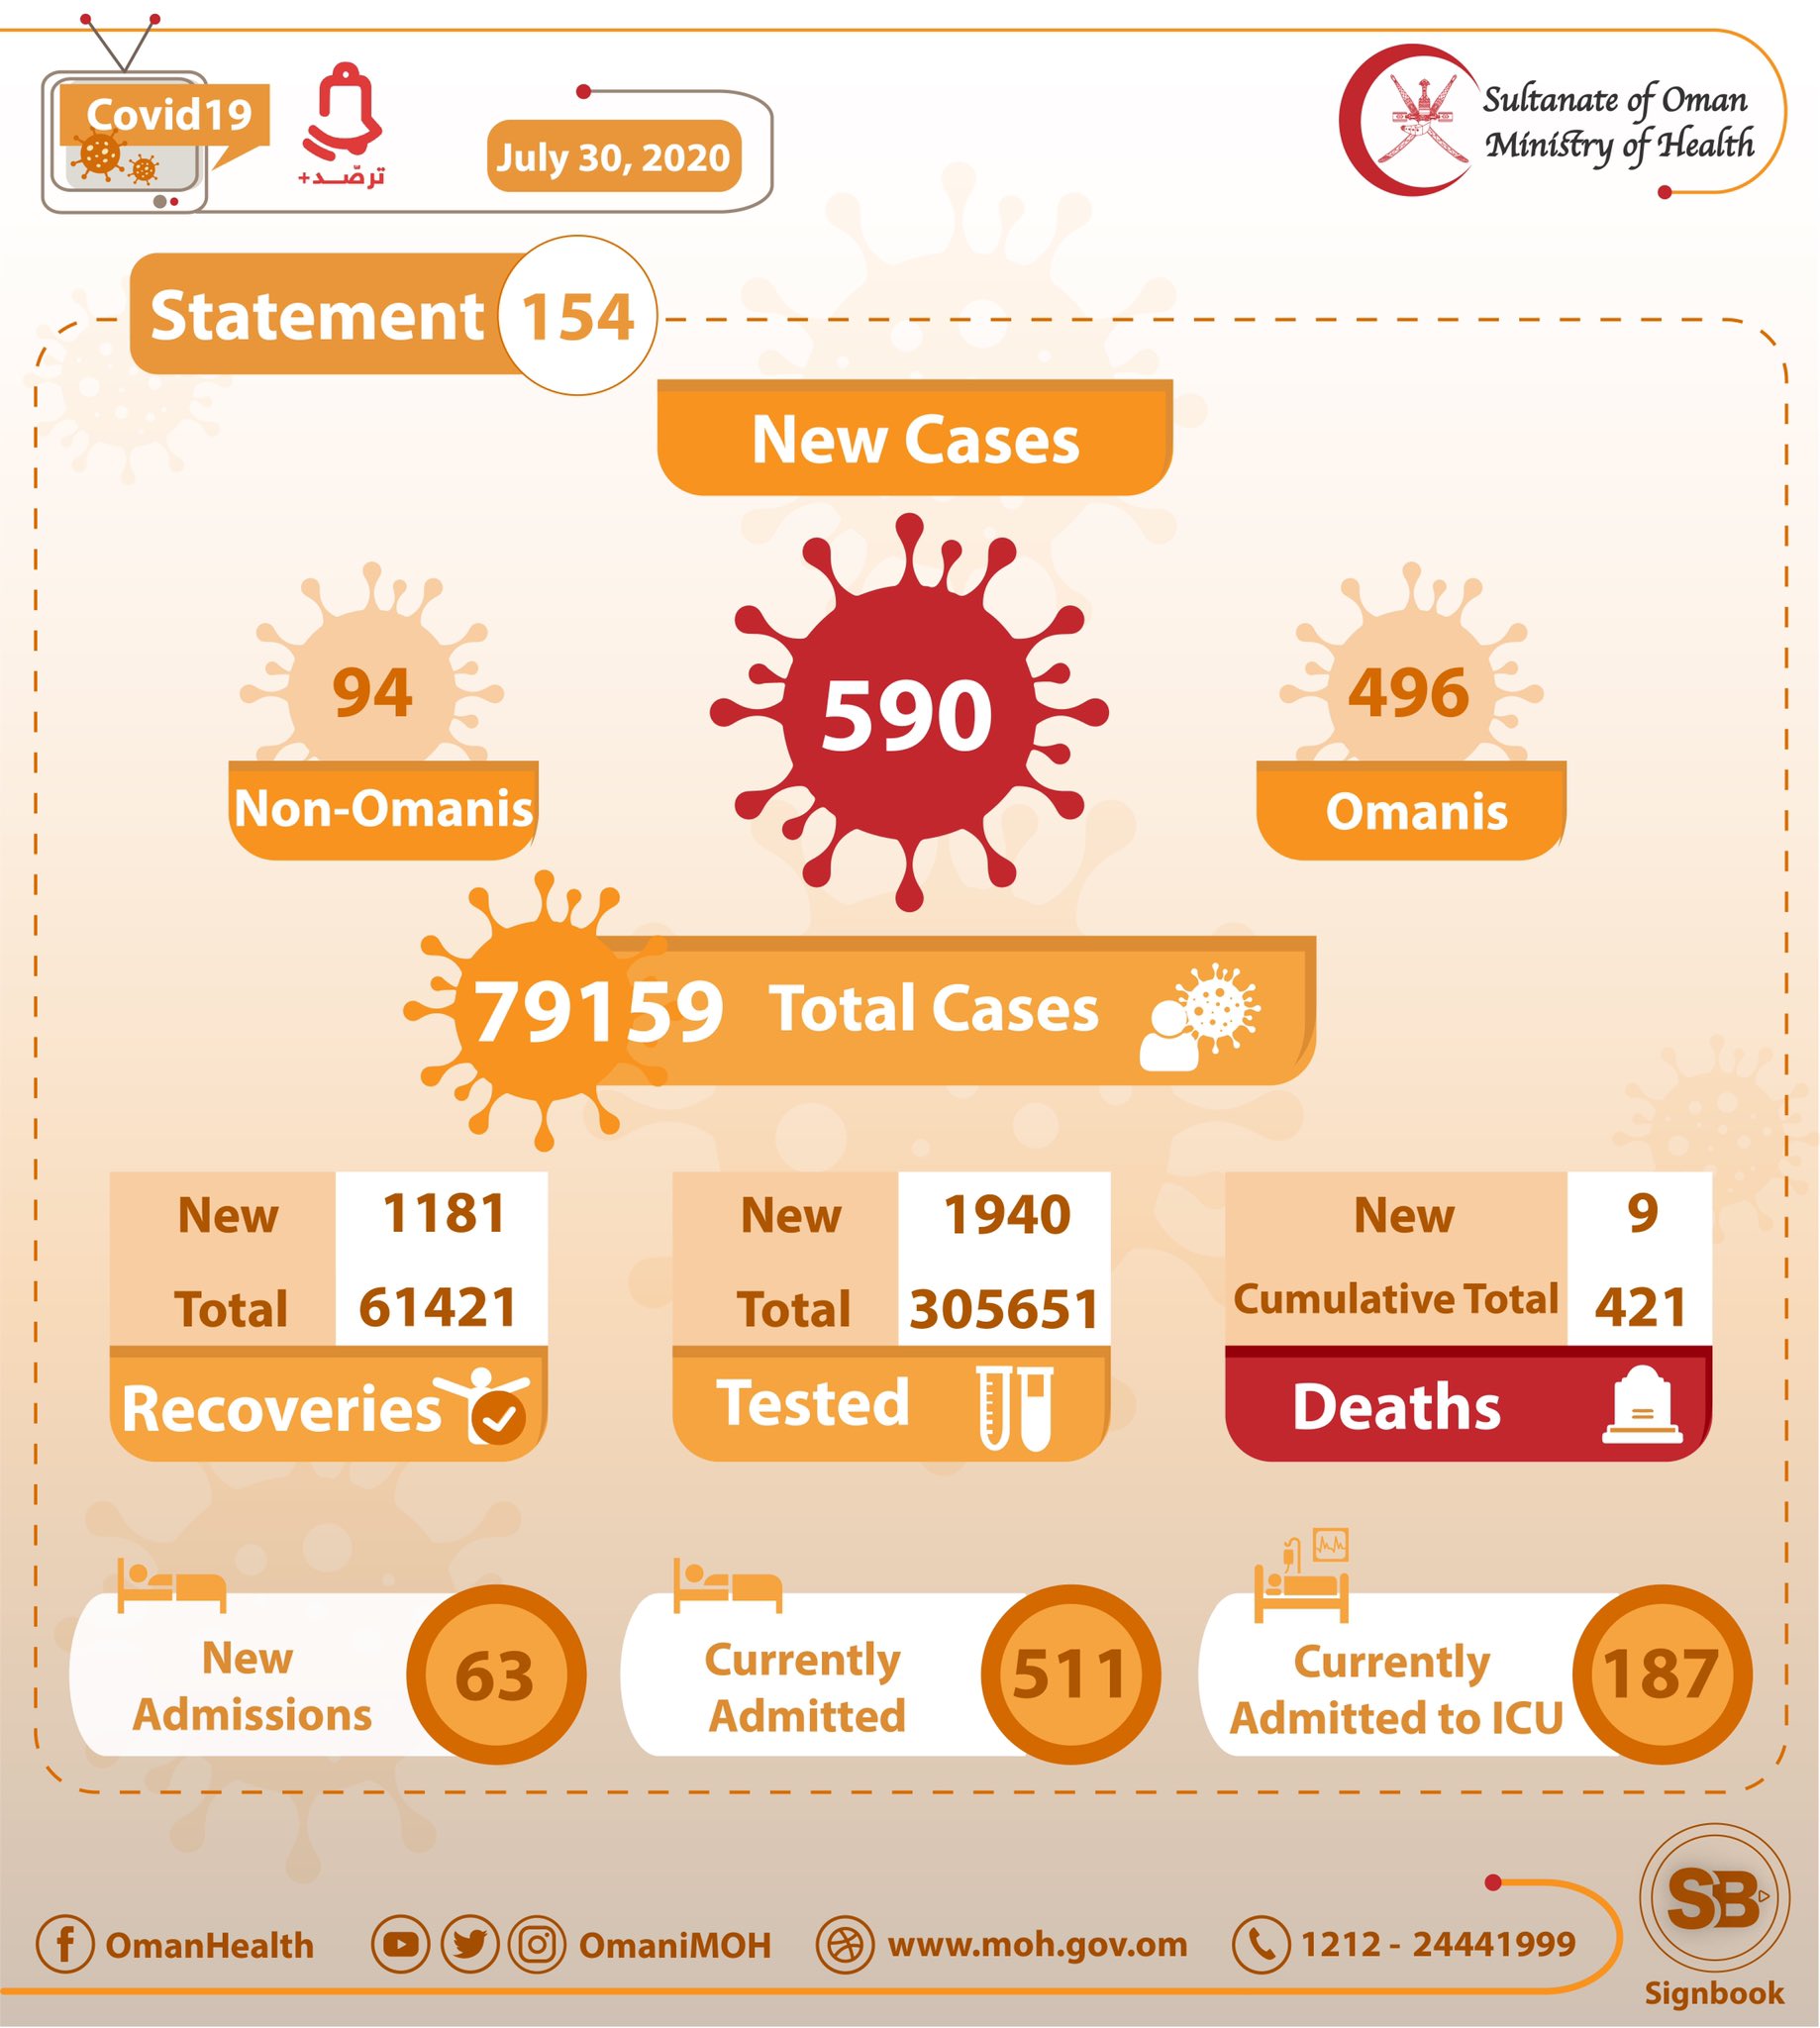 590 New Cases Registered In Oman, Total Cases Up To 79, 159